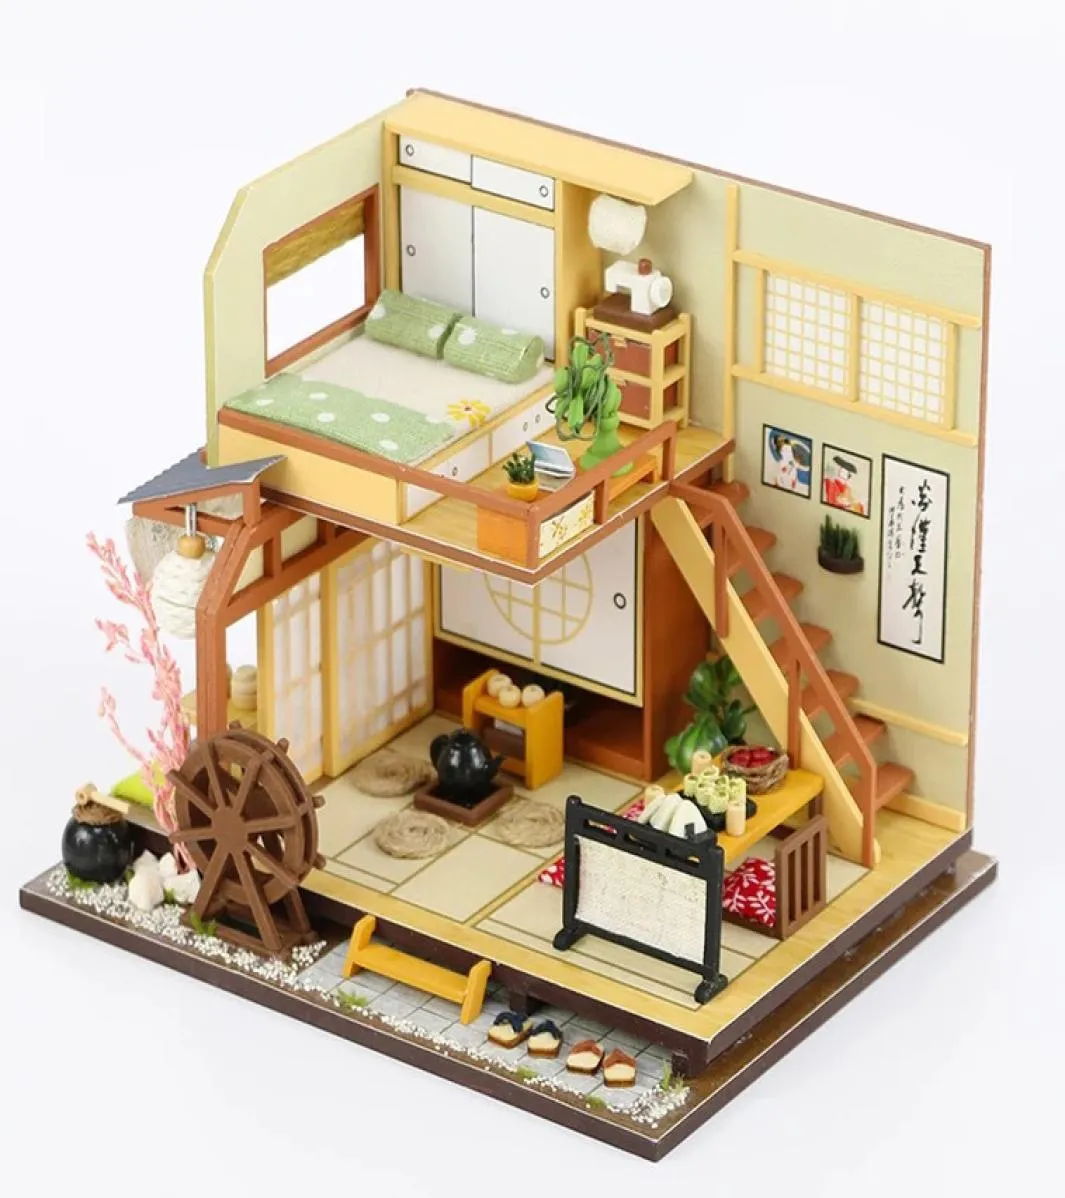 Japan Style Building Handmade Assembly Wood Hut DIY Miniature Dollhouse House Toy Birthday Gifts Miniature Diy Puzzle Model5053062